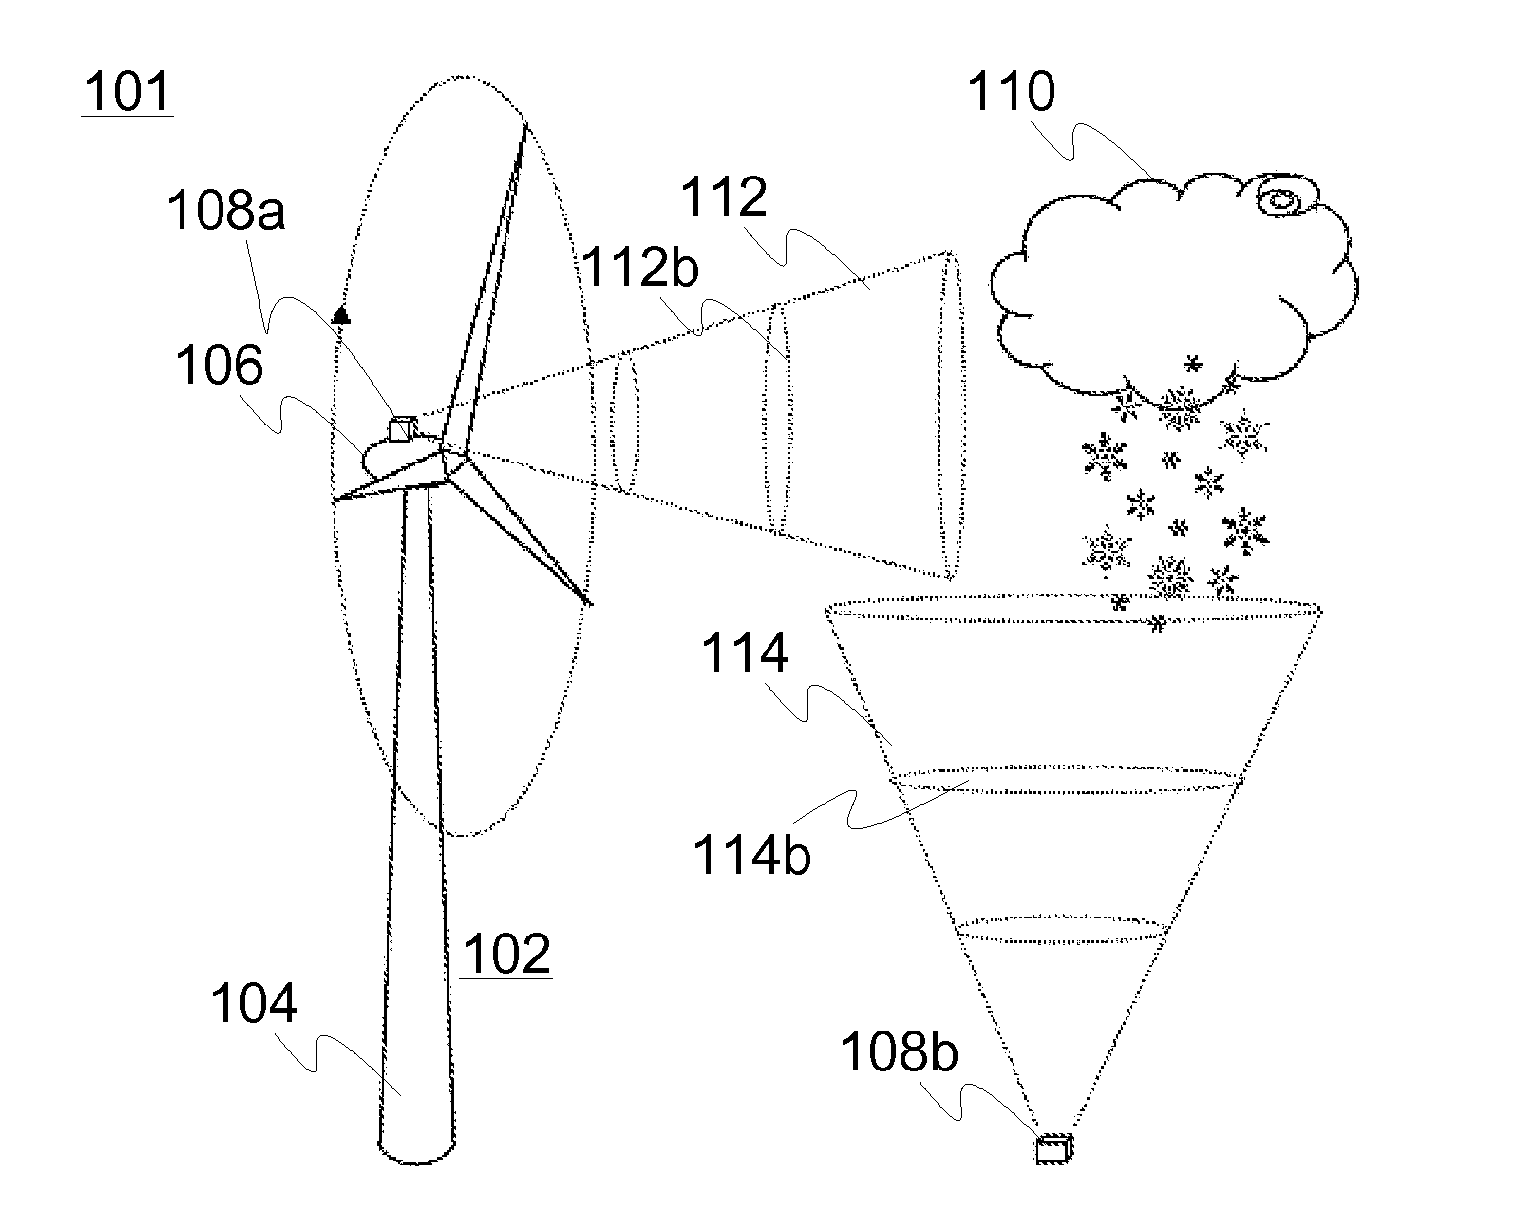 Arrangement and method for icing detection